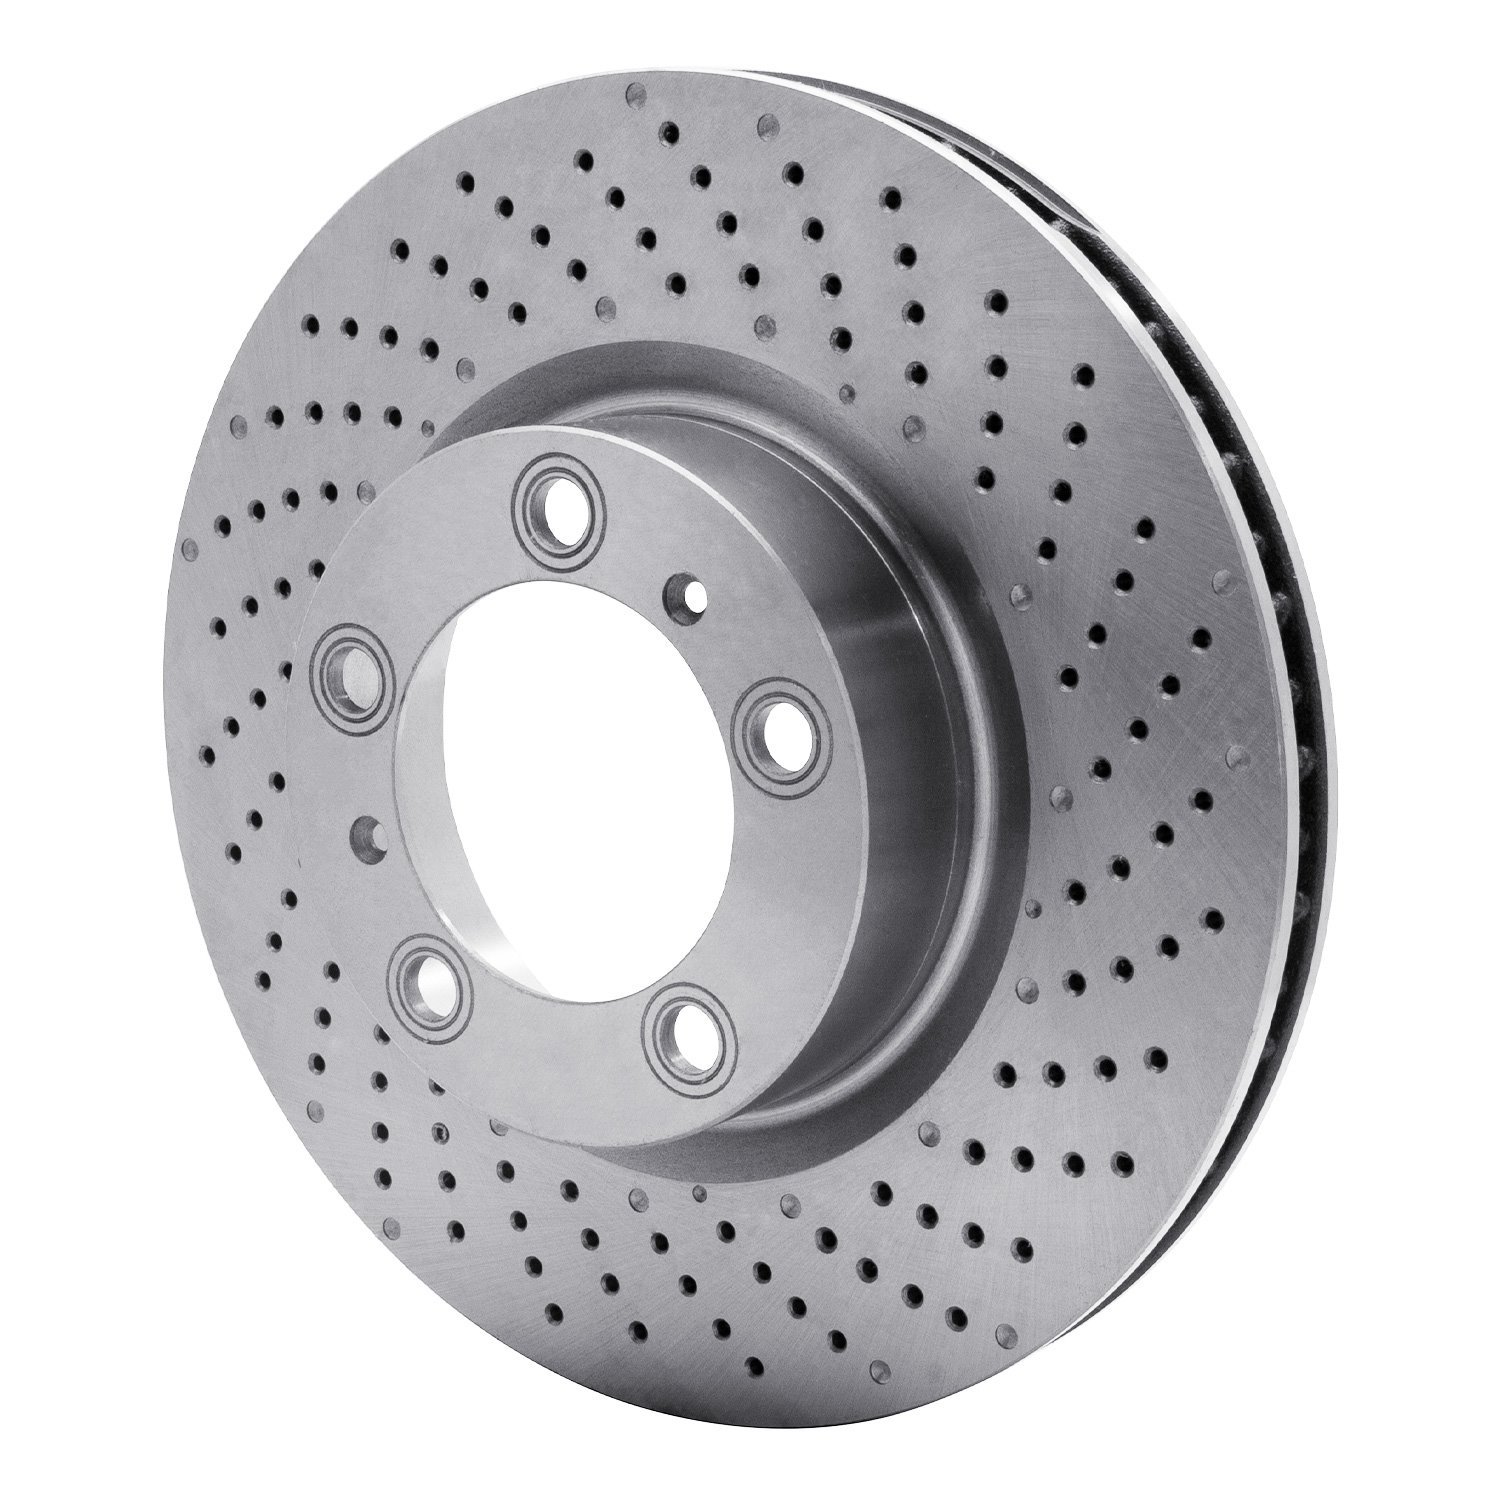 620-02052D Drilled Brake Rotor, Fits Select Porsche, Position: Right Front